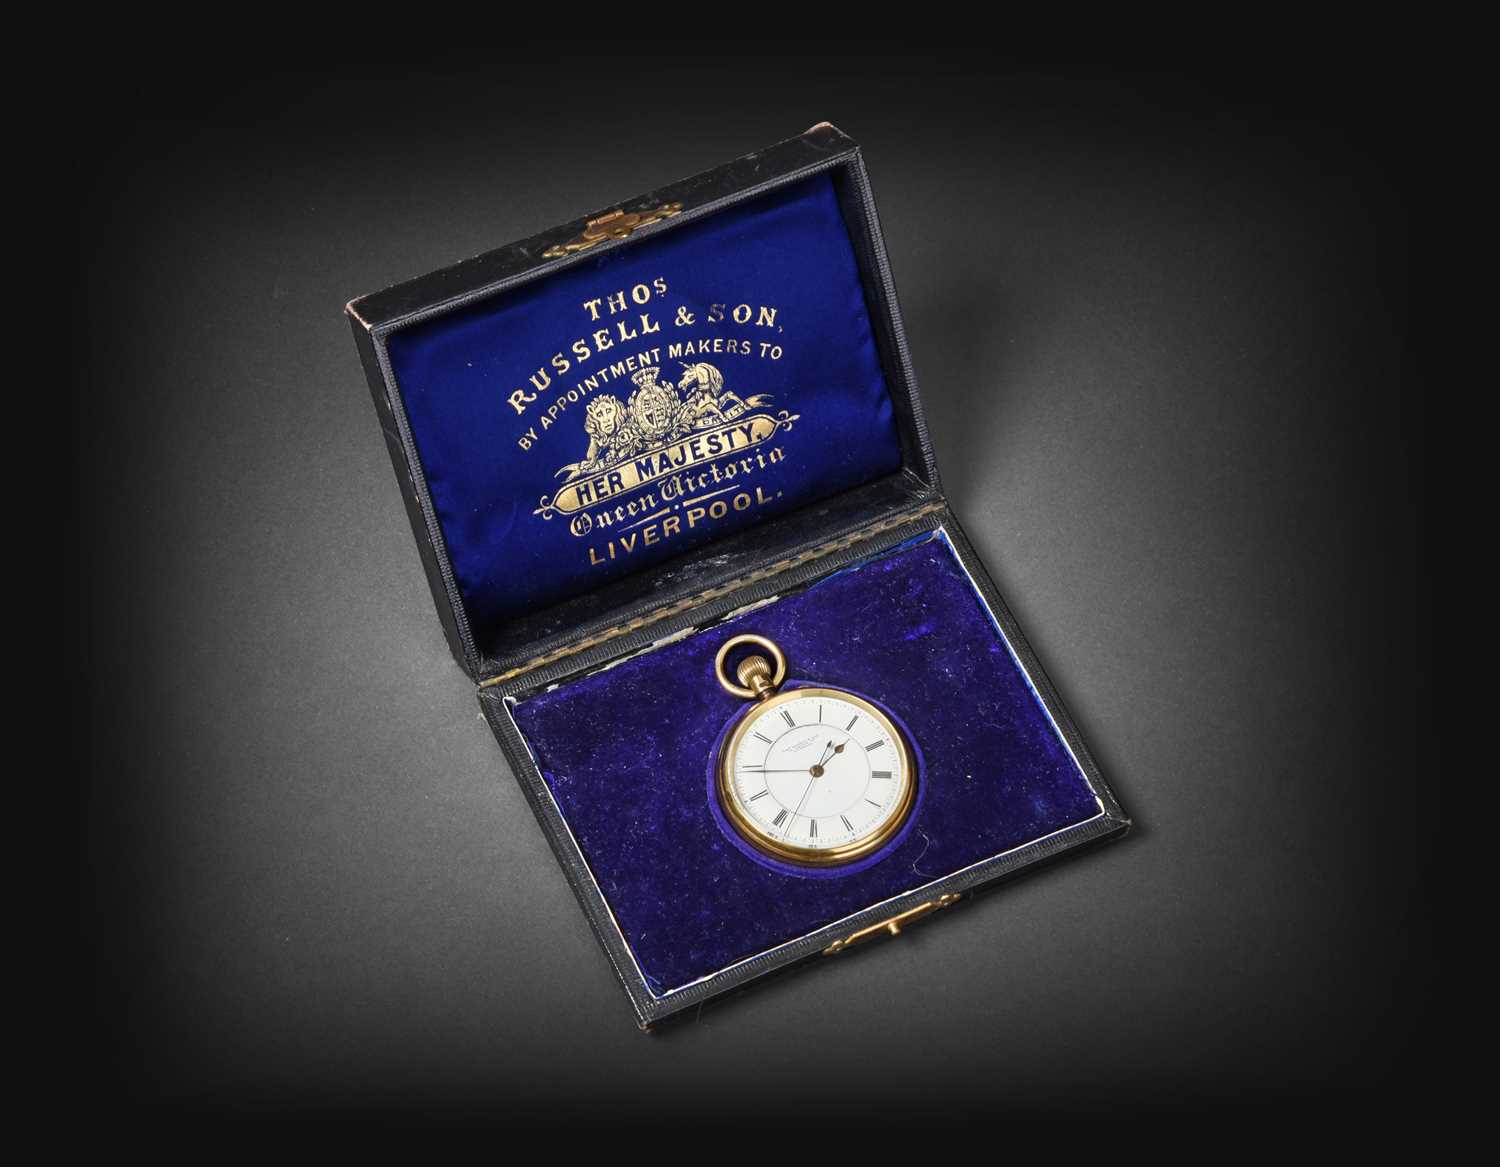 Russell & Son: An 18 Carat Gold Chronograph Pocket Watch Sold with the Original Warranty Paperwork s - Image 2 of 3